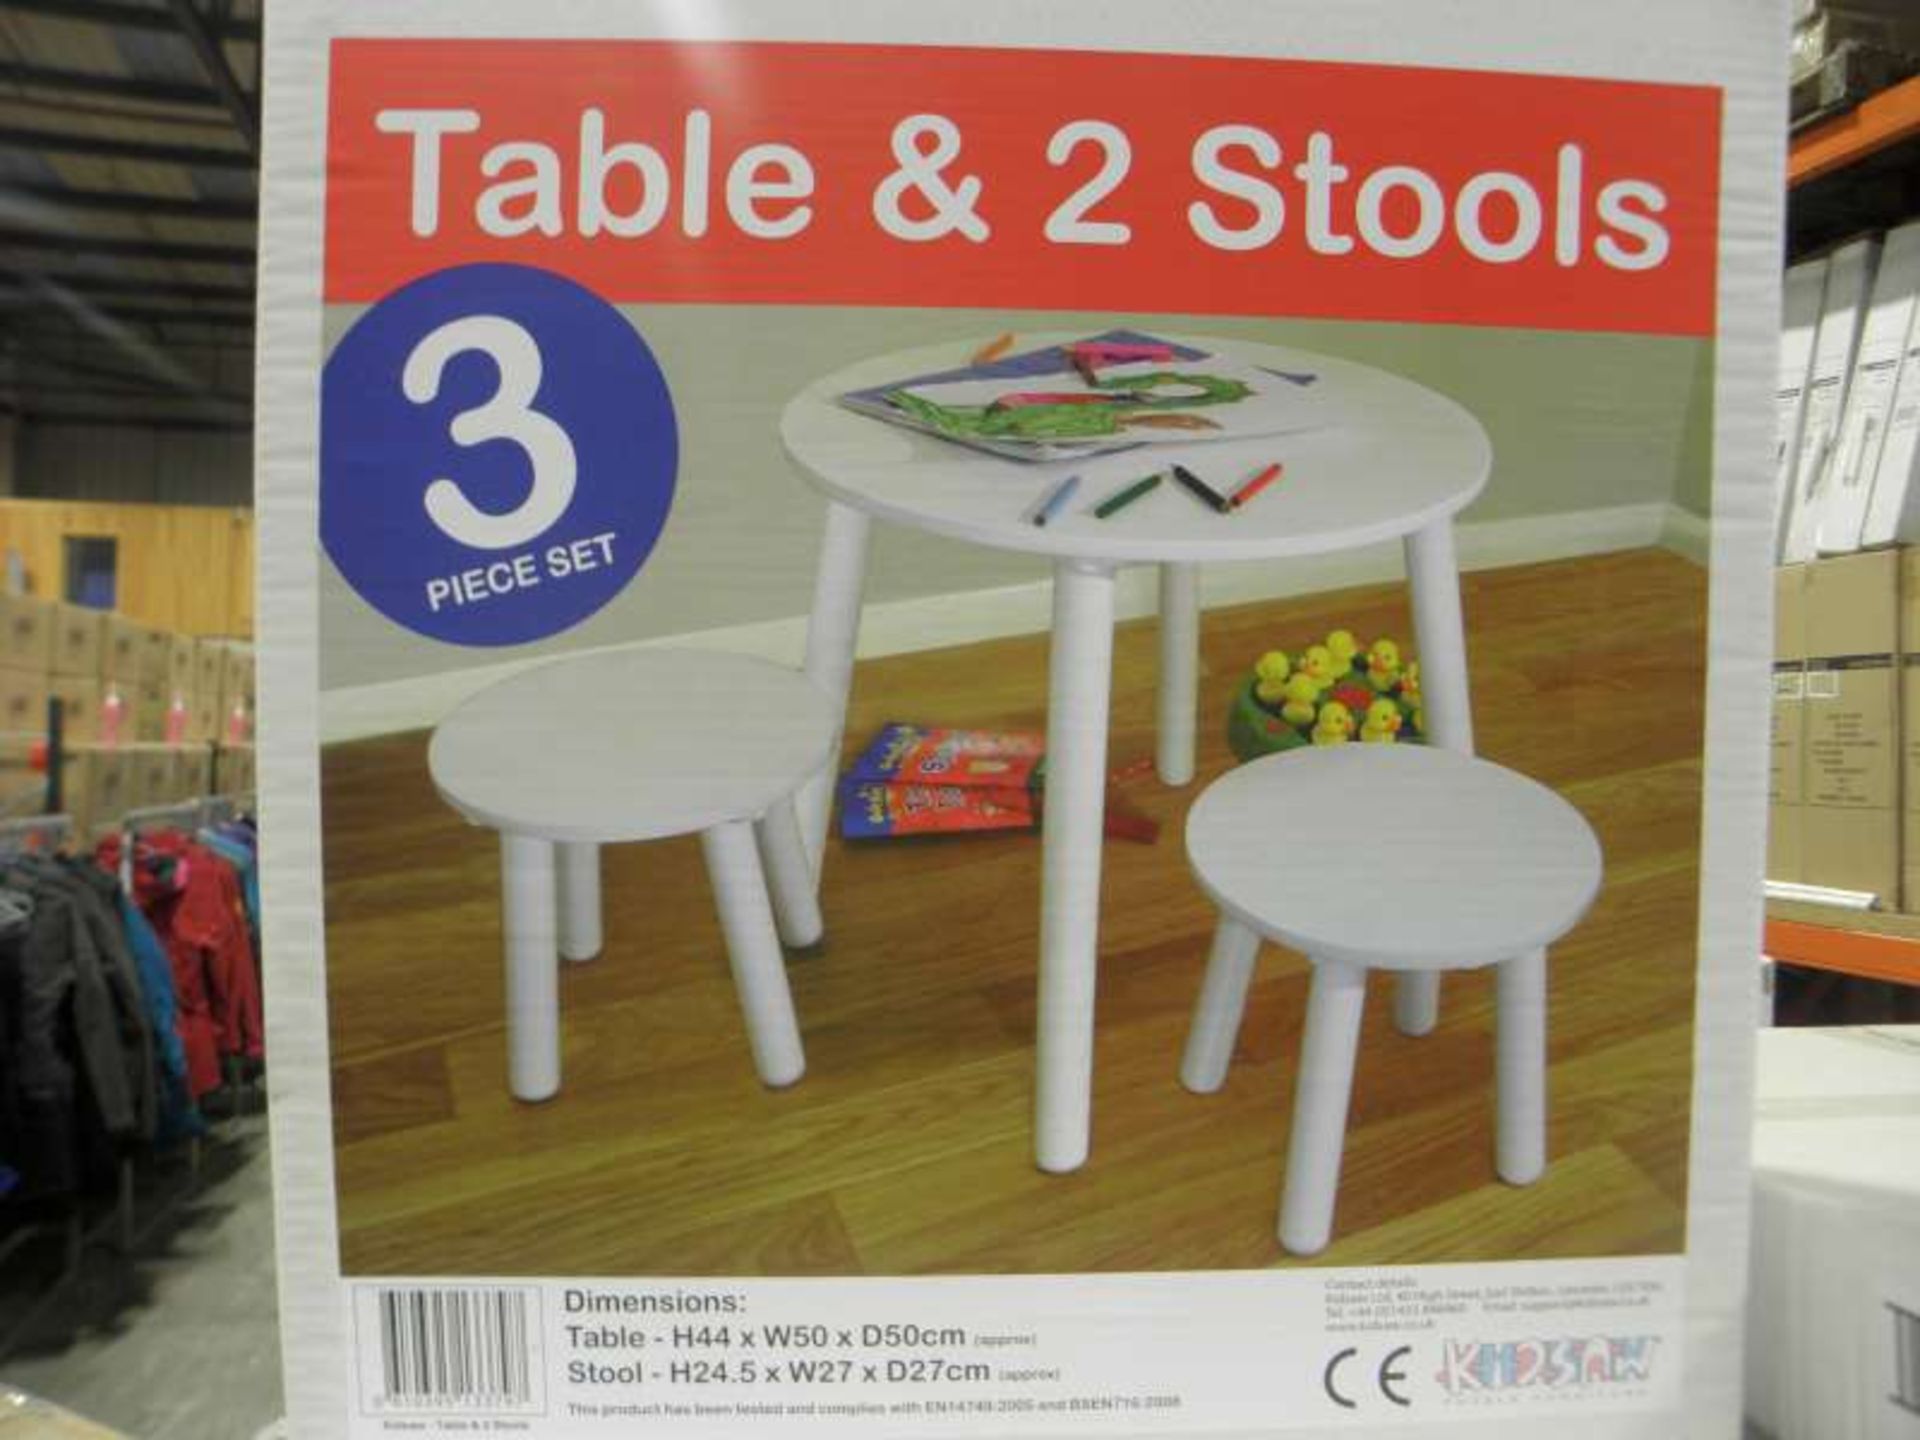 6 X KIDSAW 3 PIECE TABLE AND STOOL SETS